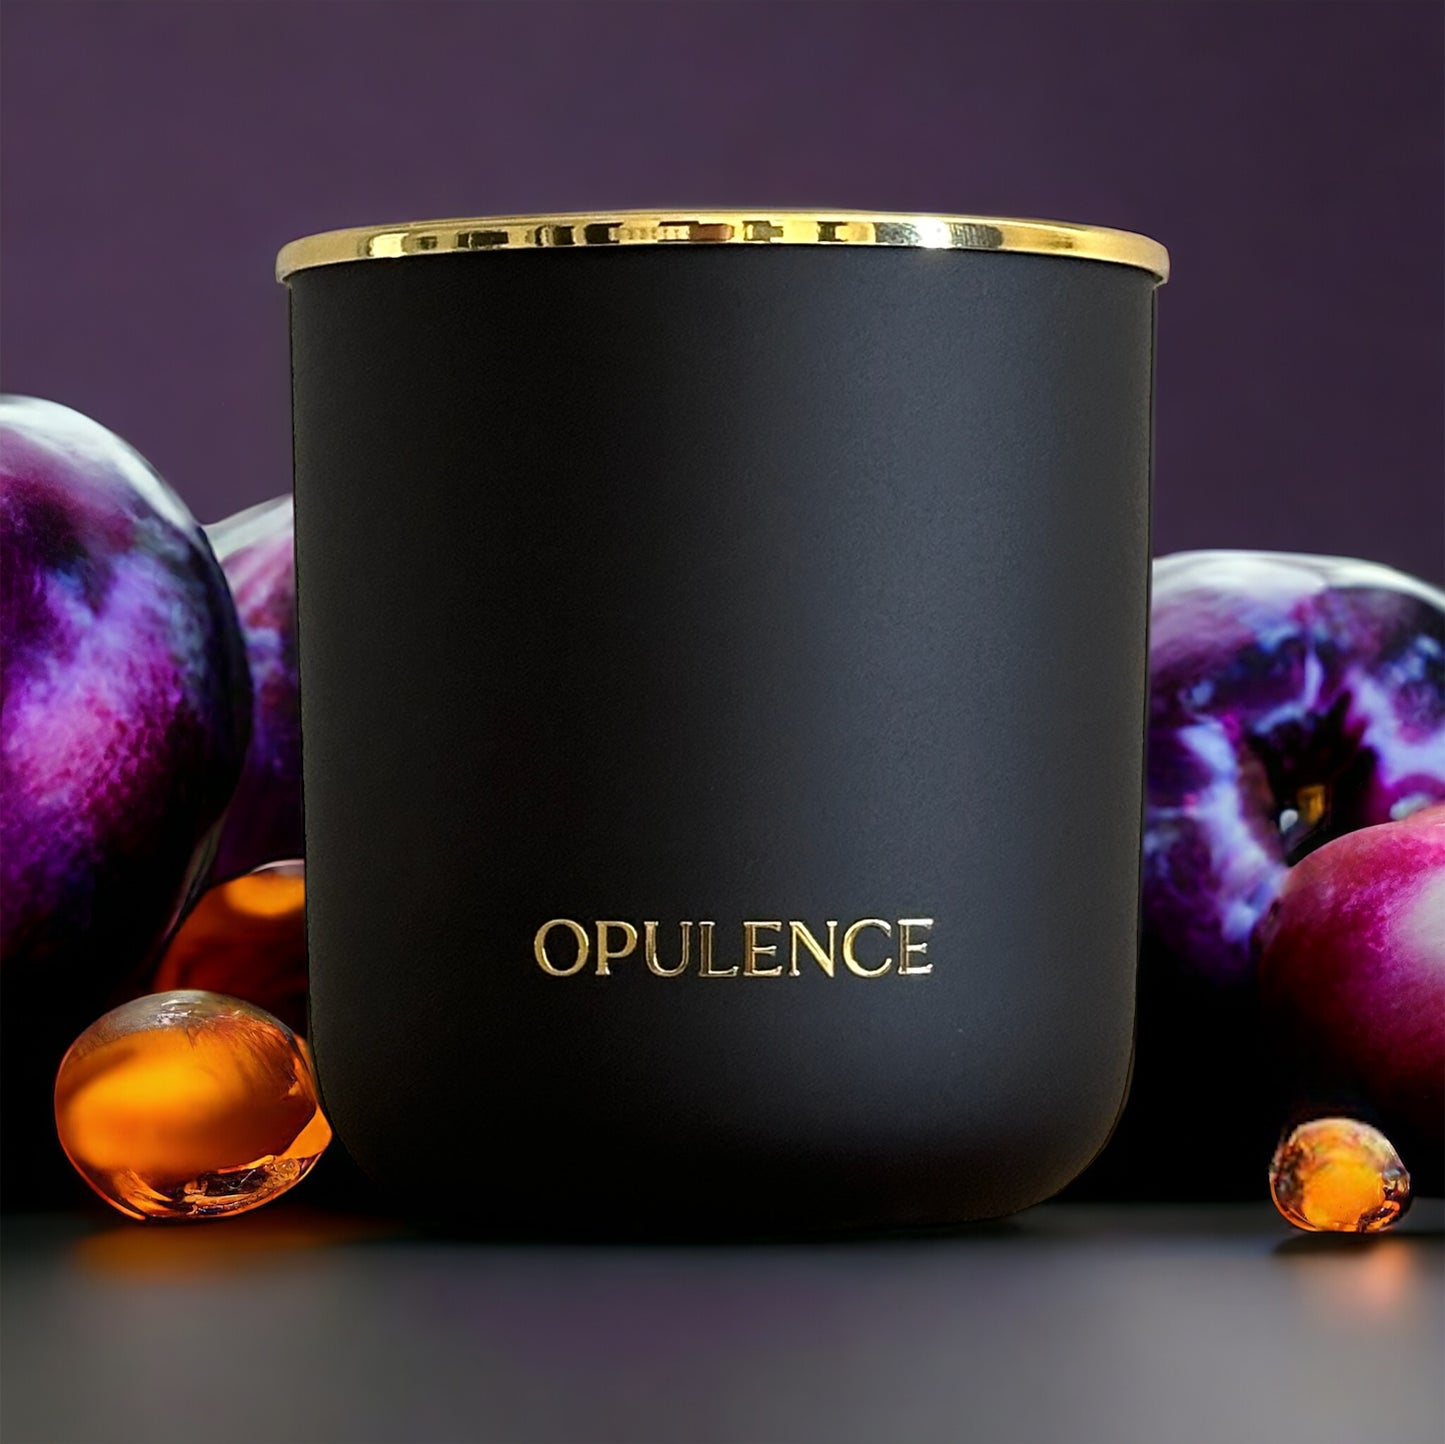 Opulence Private Blend Candle - 8 oz (wholesale)